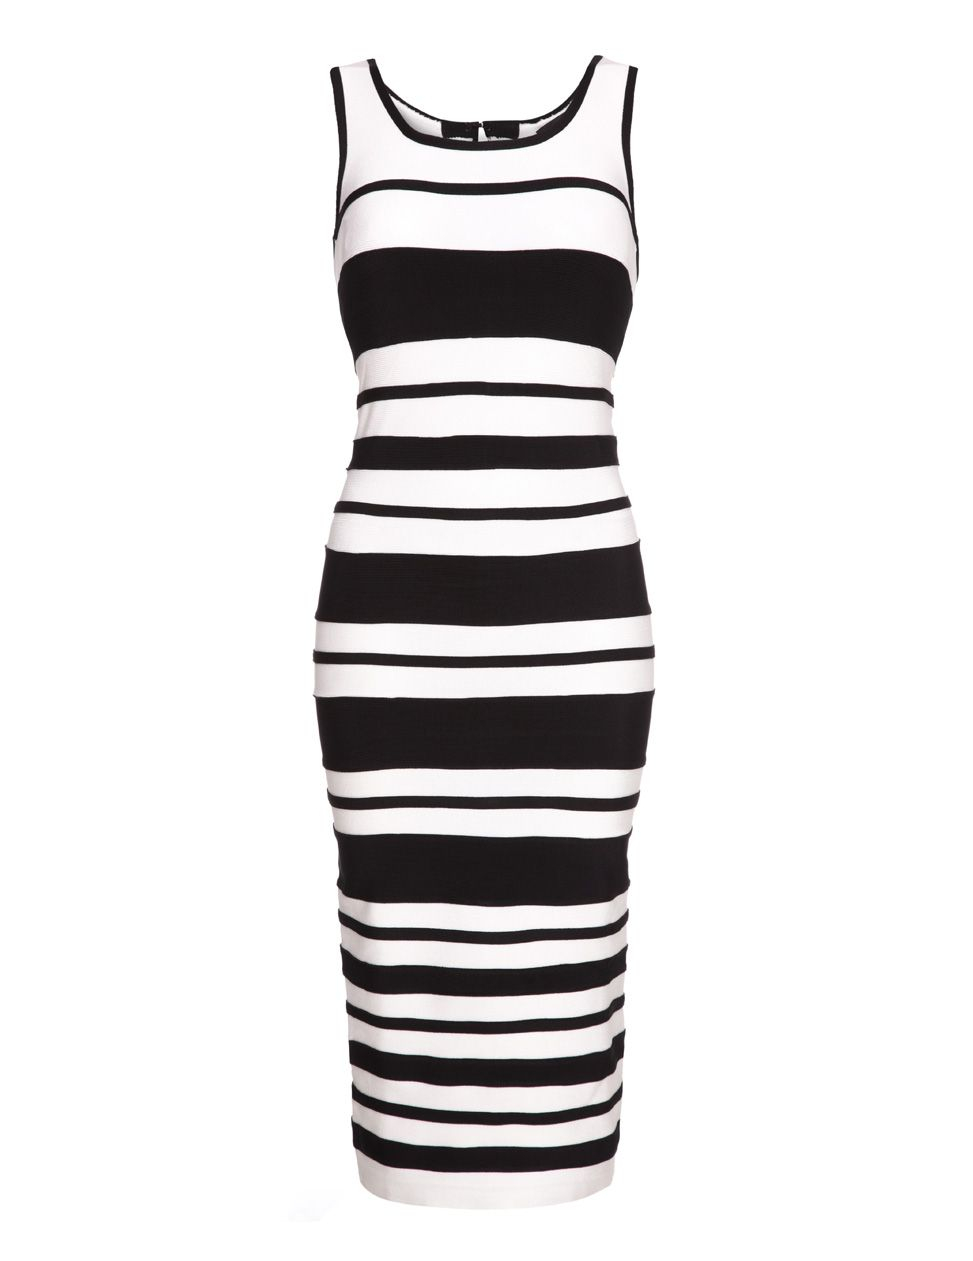 Black And White Midi Bodycon Dress And Best Choice